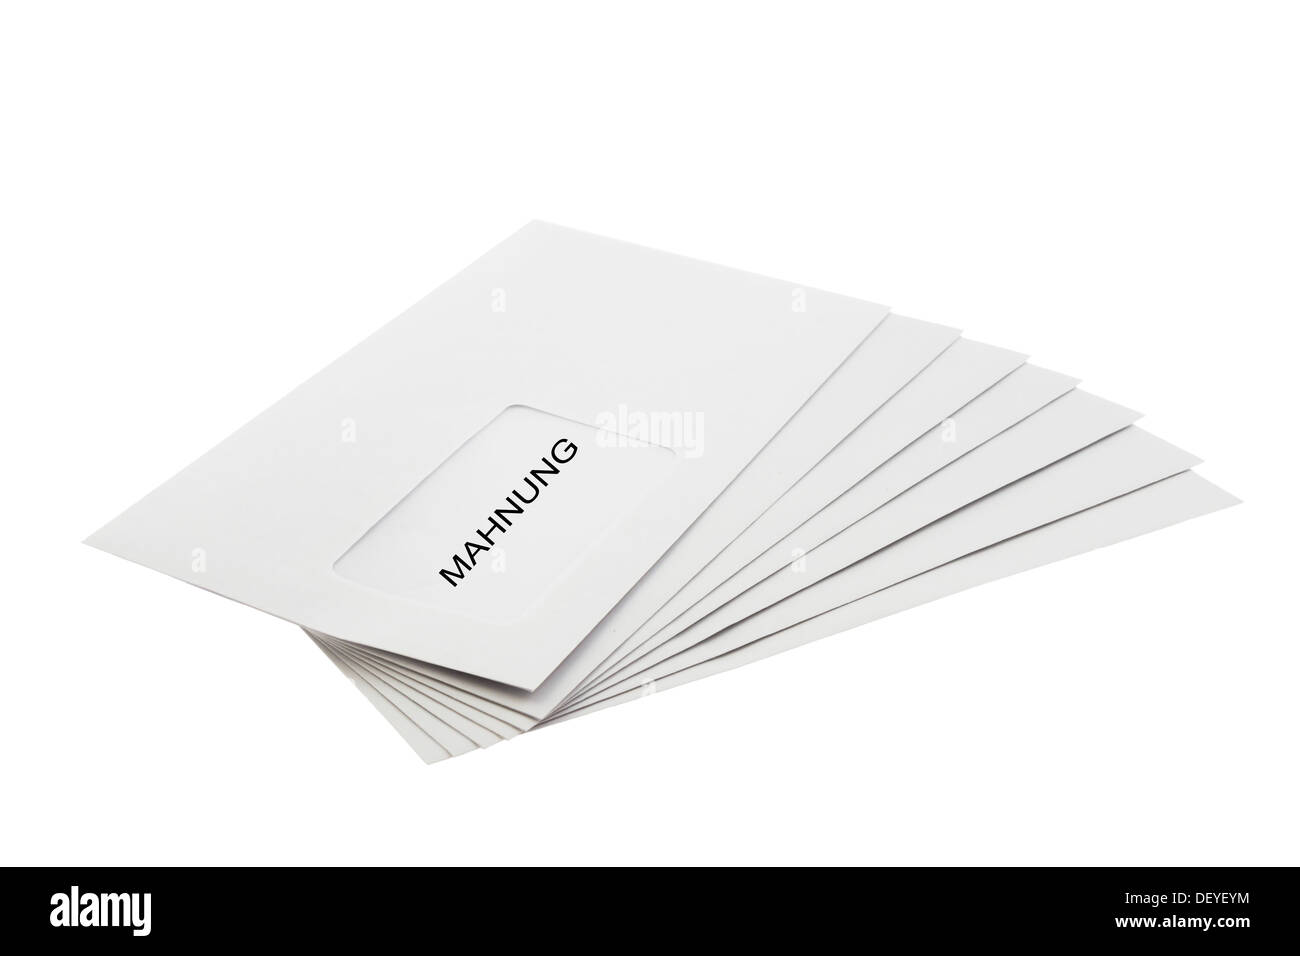 Mahnung (german demand note) written on a Batch of Envelopes isolated on White BAckground Stock Photo